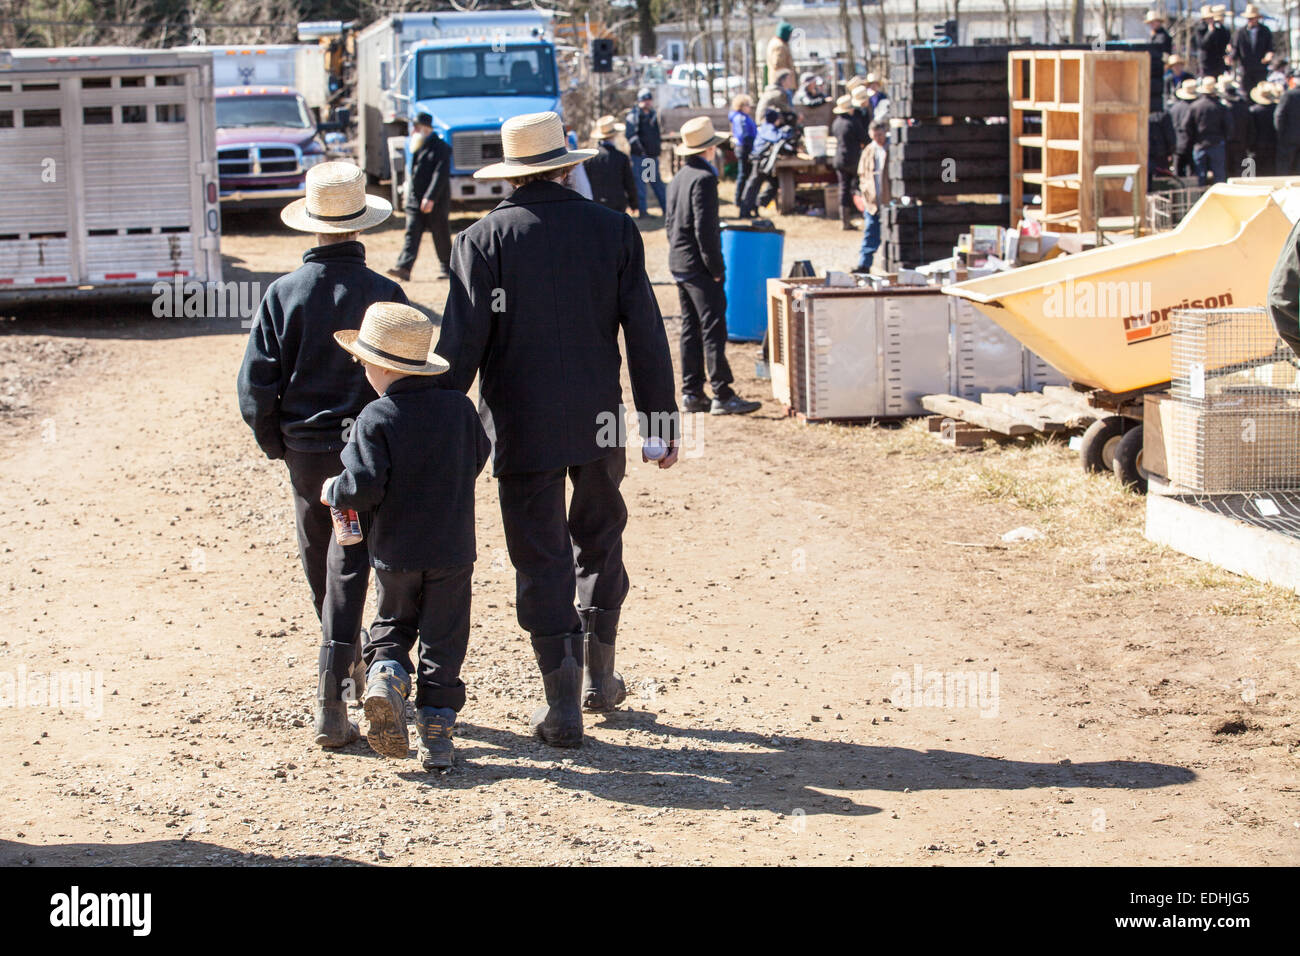 Amish at the annual Spring Mud Sale and  public auction in Gordonville, PA, which benefits the local fire company. Stock Photo